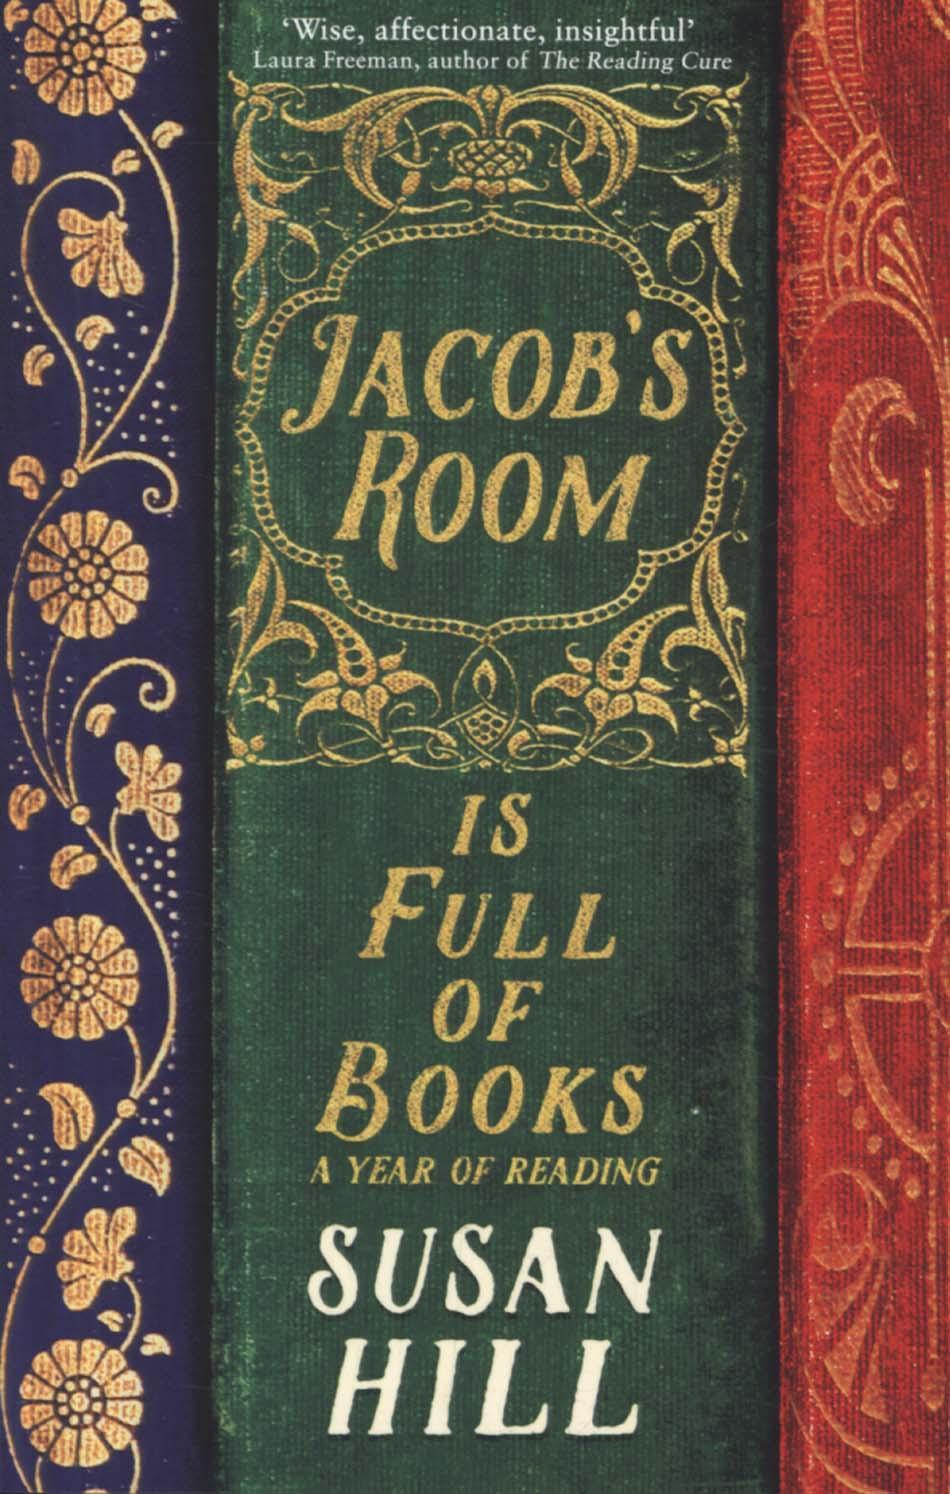 Jacob's Room is Full of Books - Susan Hill